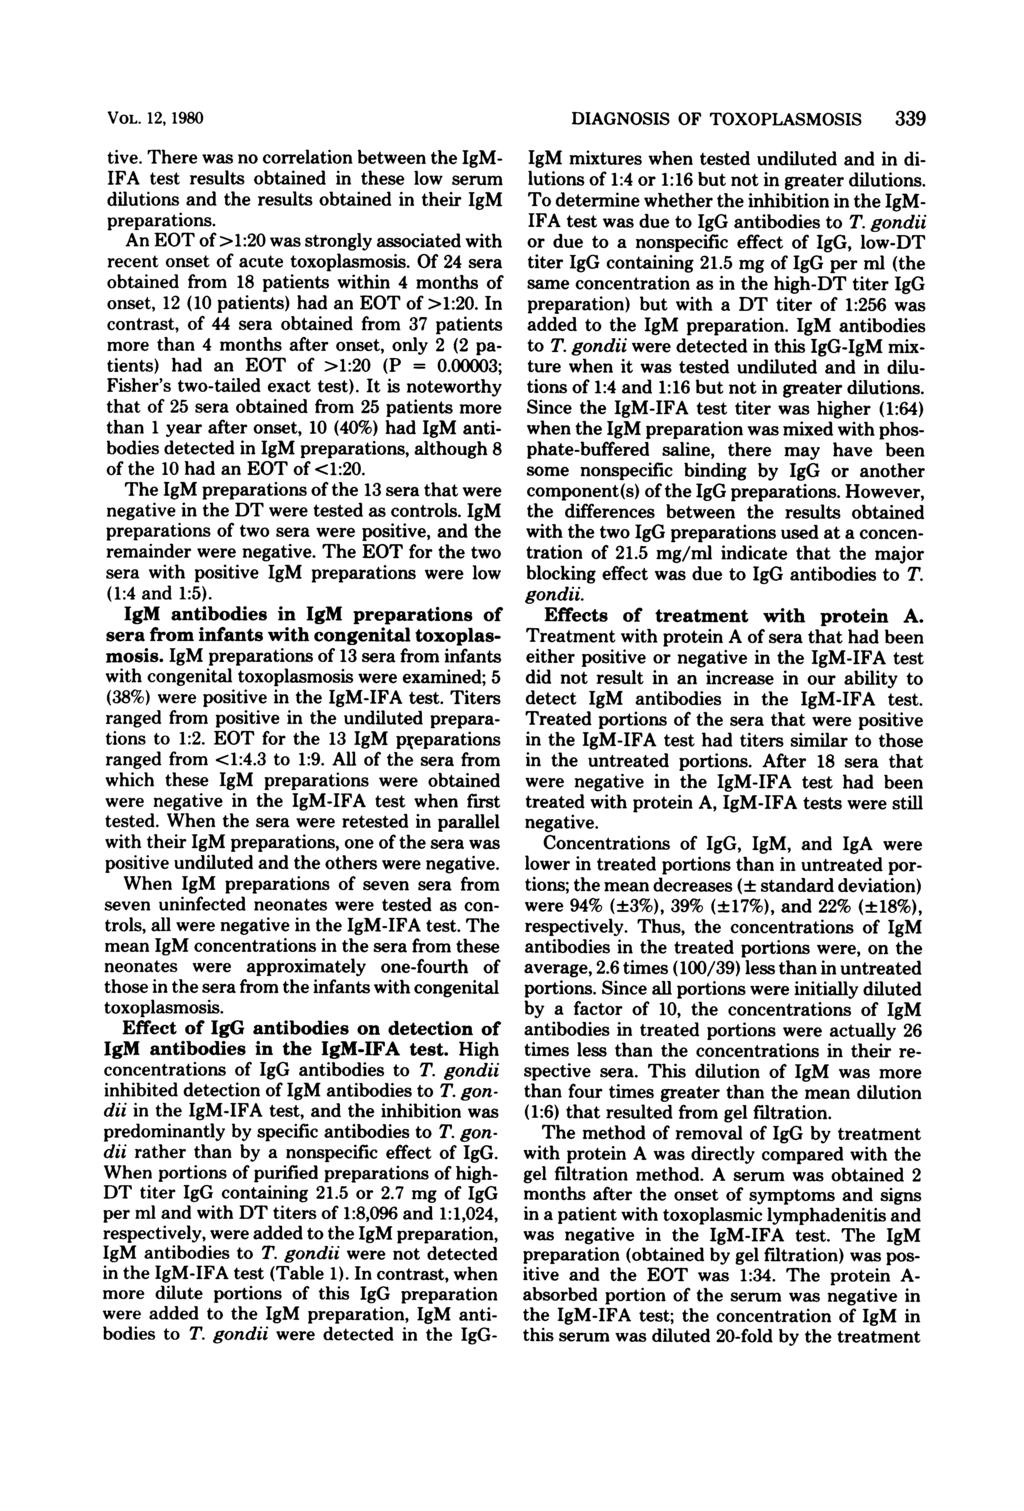 VOL. 12, 1980 tive. There was no correlation between the IgM- IFA test results obtained in these low serum dilutions and the results obtained in their IgM preparations.